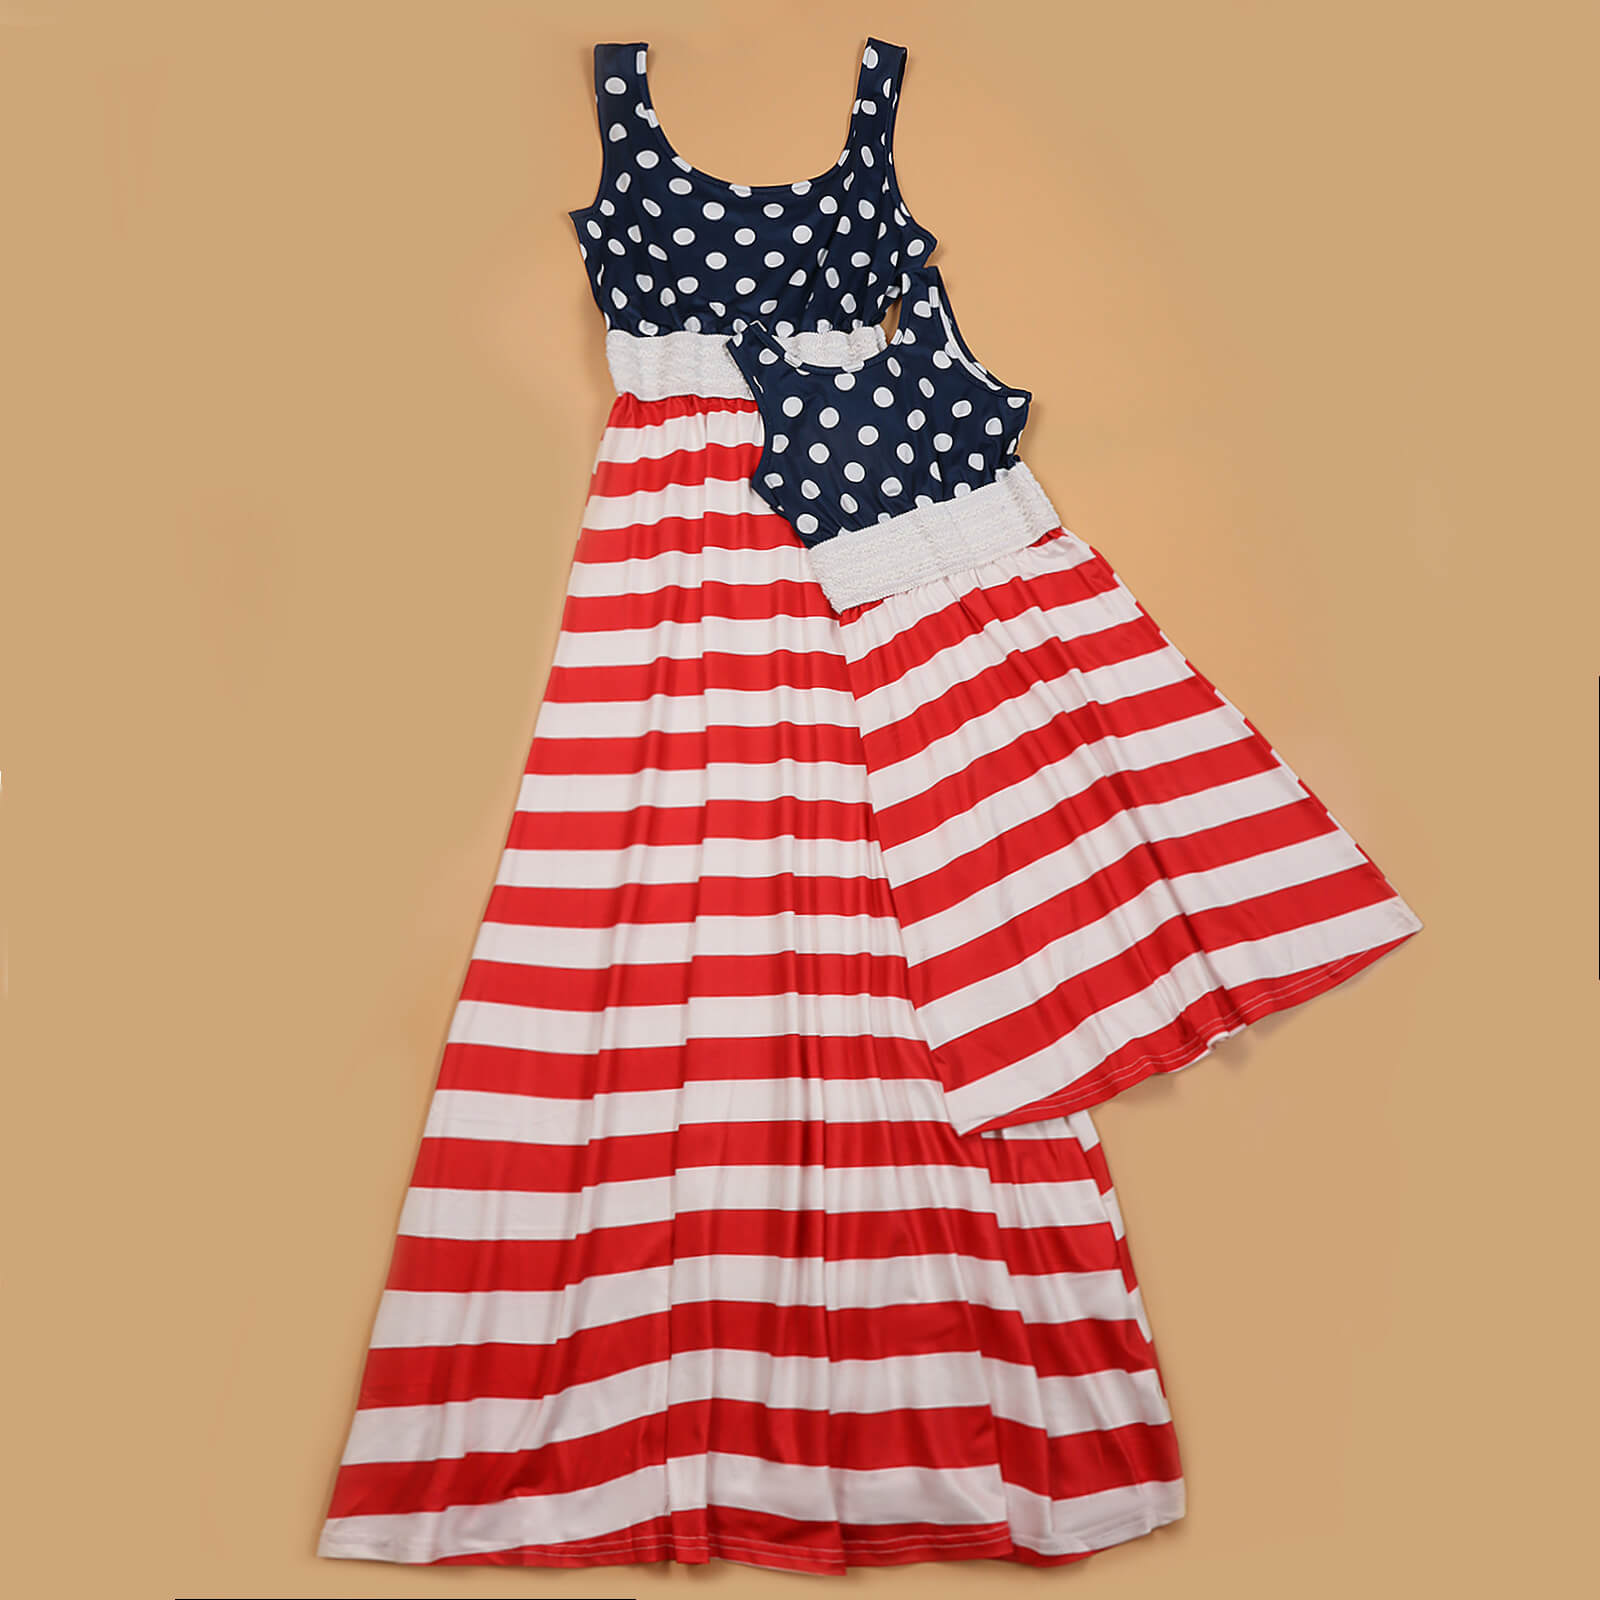 Mommy and Me Independent Day Dress Sleeveless American Flag Striped Dress for Mom Daughter